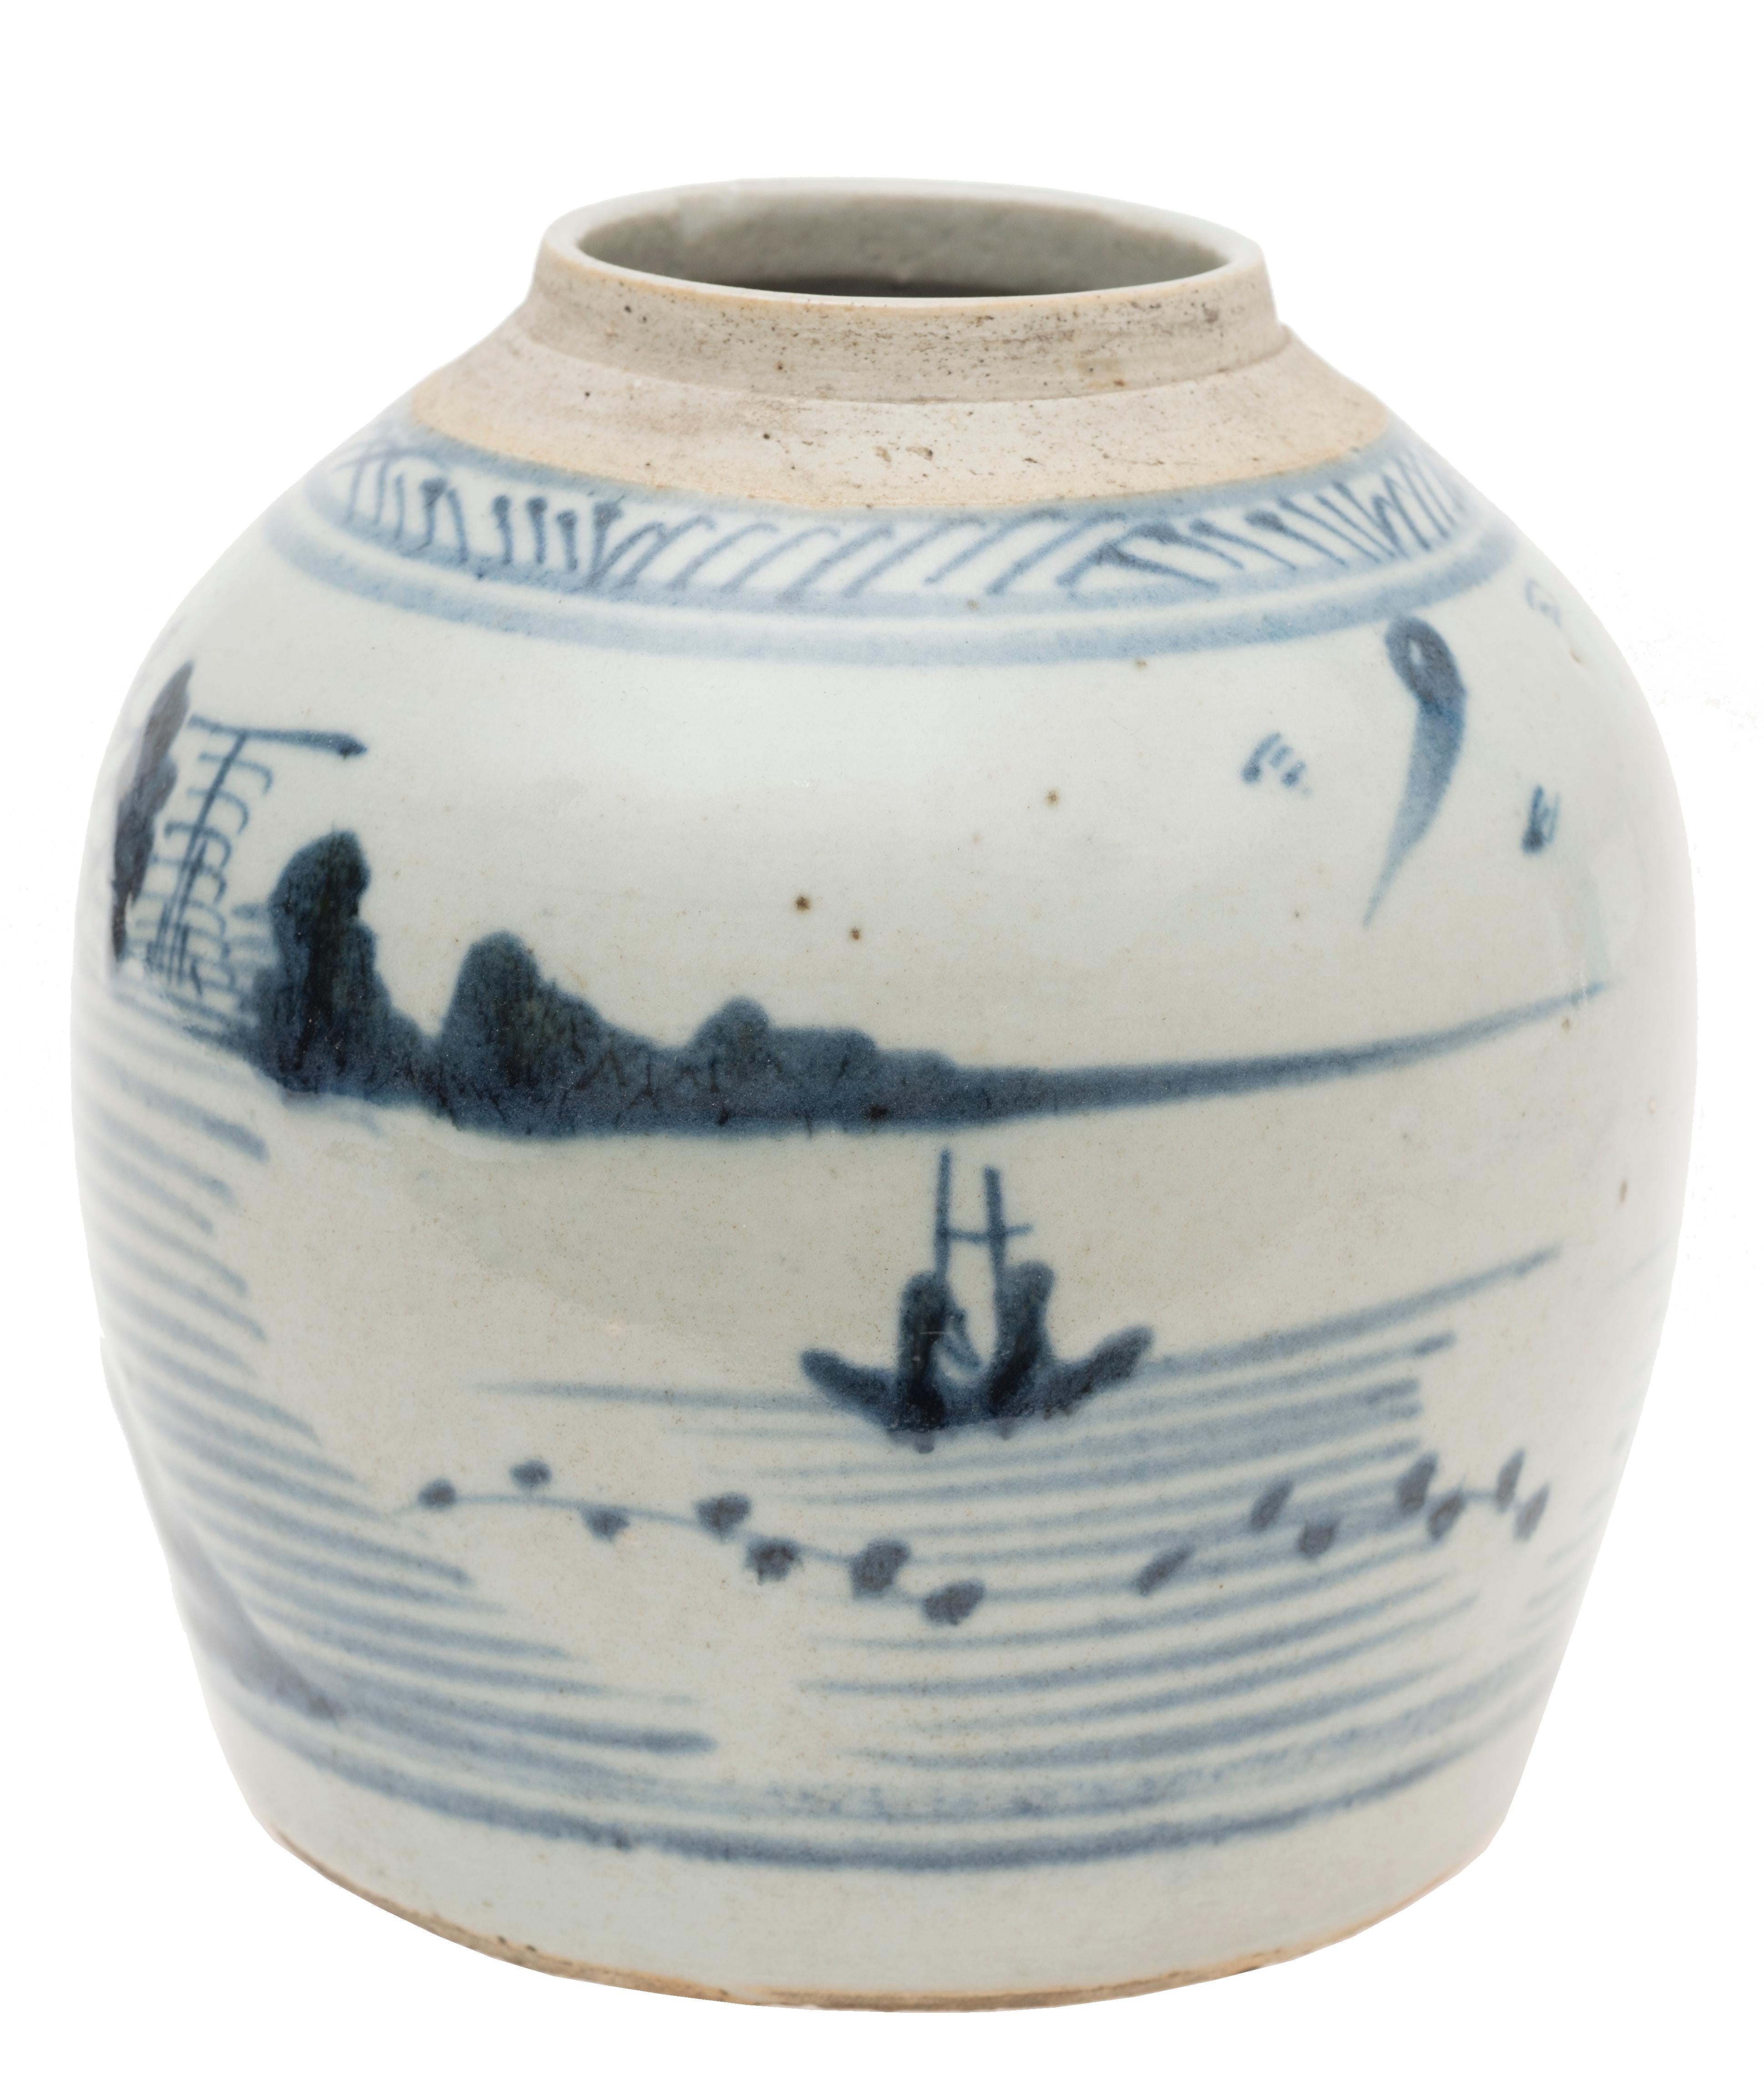 This Ginger Vase is an original decorative porcelain object realized in China by Chinese manufacture during the Ming dynasty, it was the ruling dynasty in China from 1368-1644.

Beautiful ginger pot decorated with blue landscapes on a white